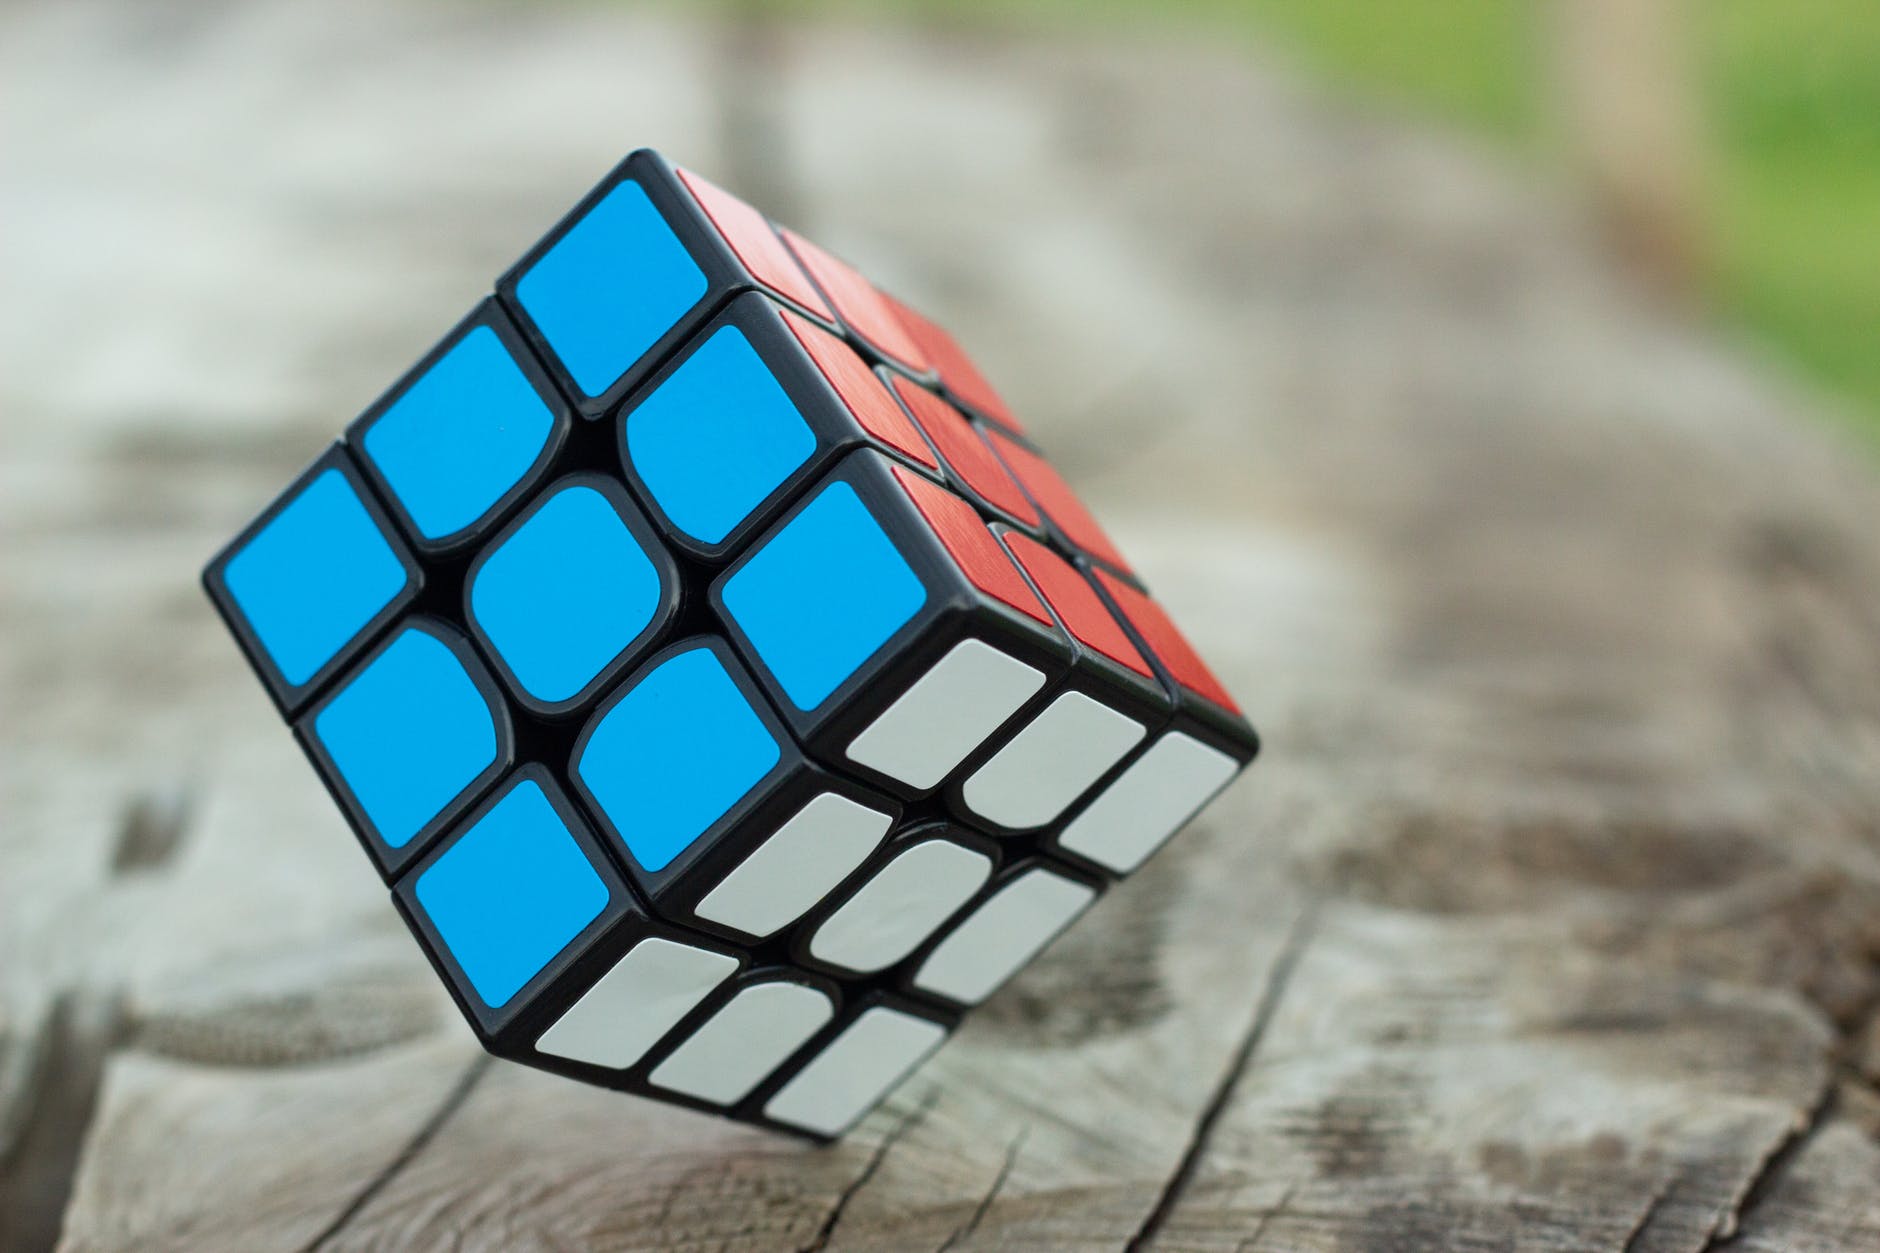 pexels photo 1500610 8 Interesting Facts About the Rubik’s Cube